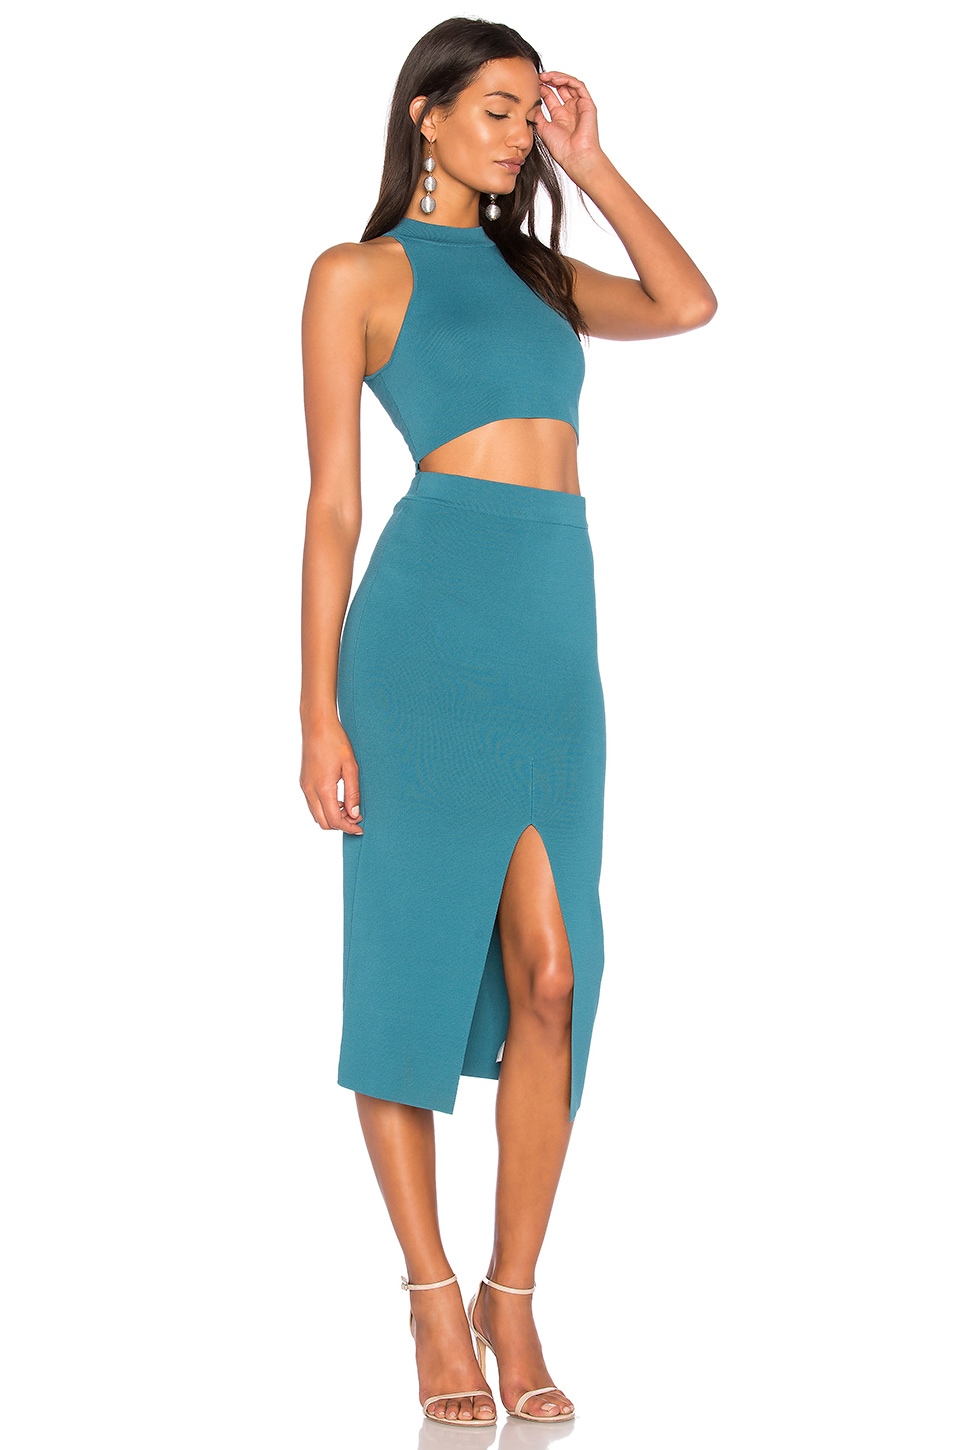 ENDLESS ROSE Cut Out Knit Bodycon Dress In Teal. in Teal Blue | ModeSens